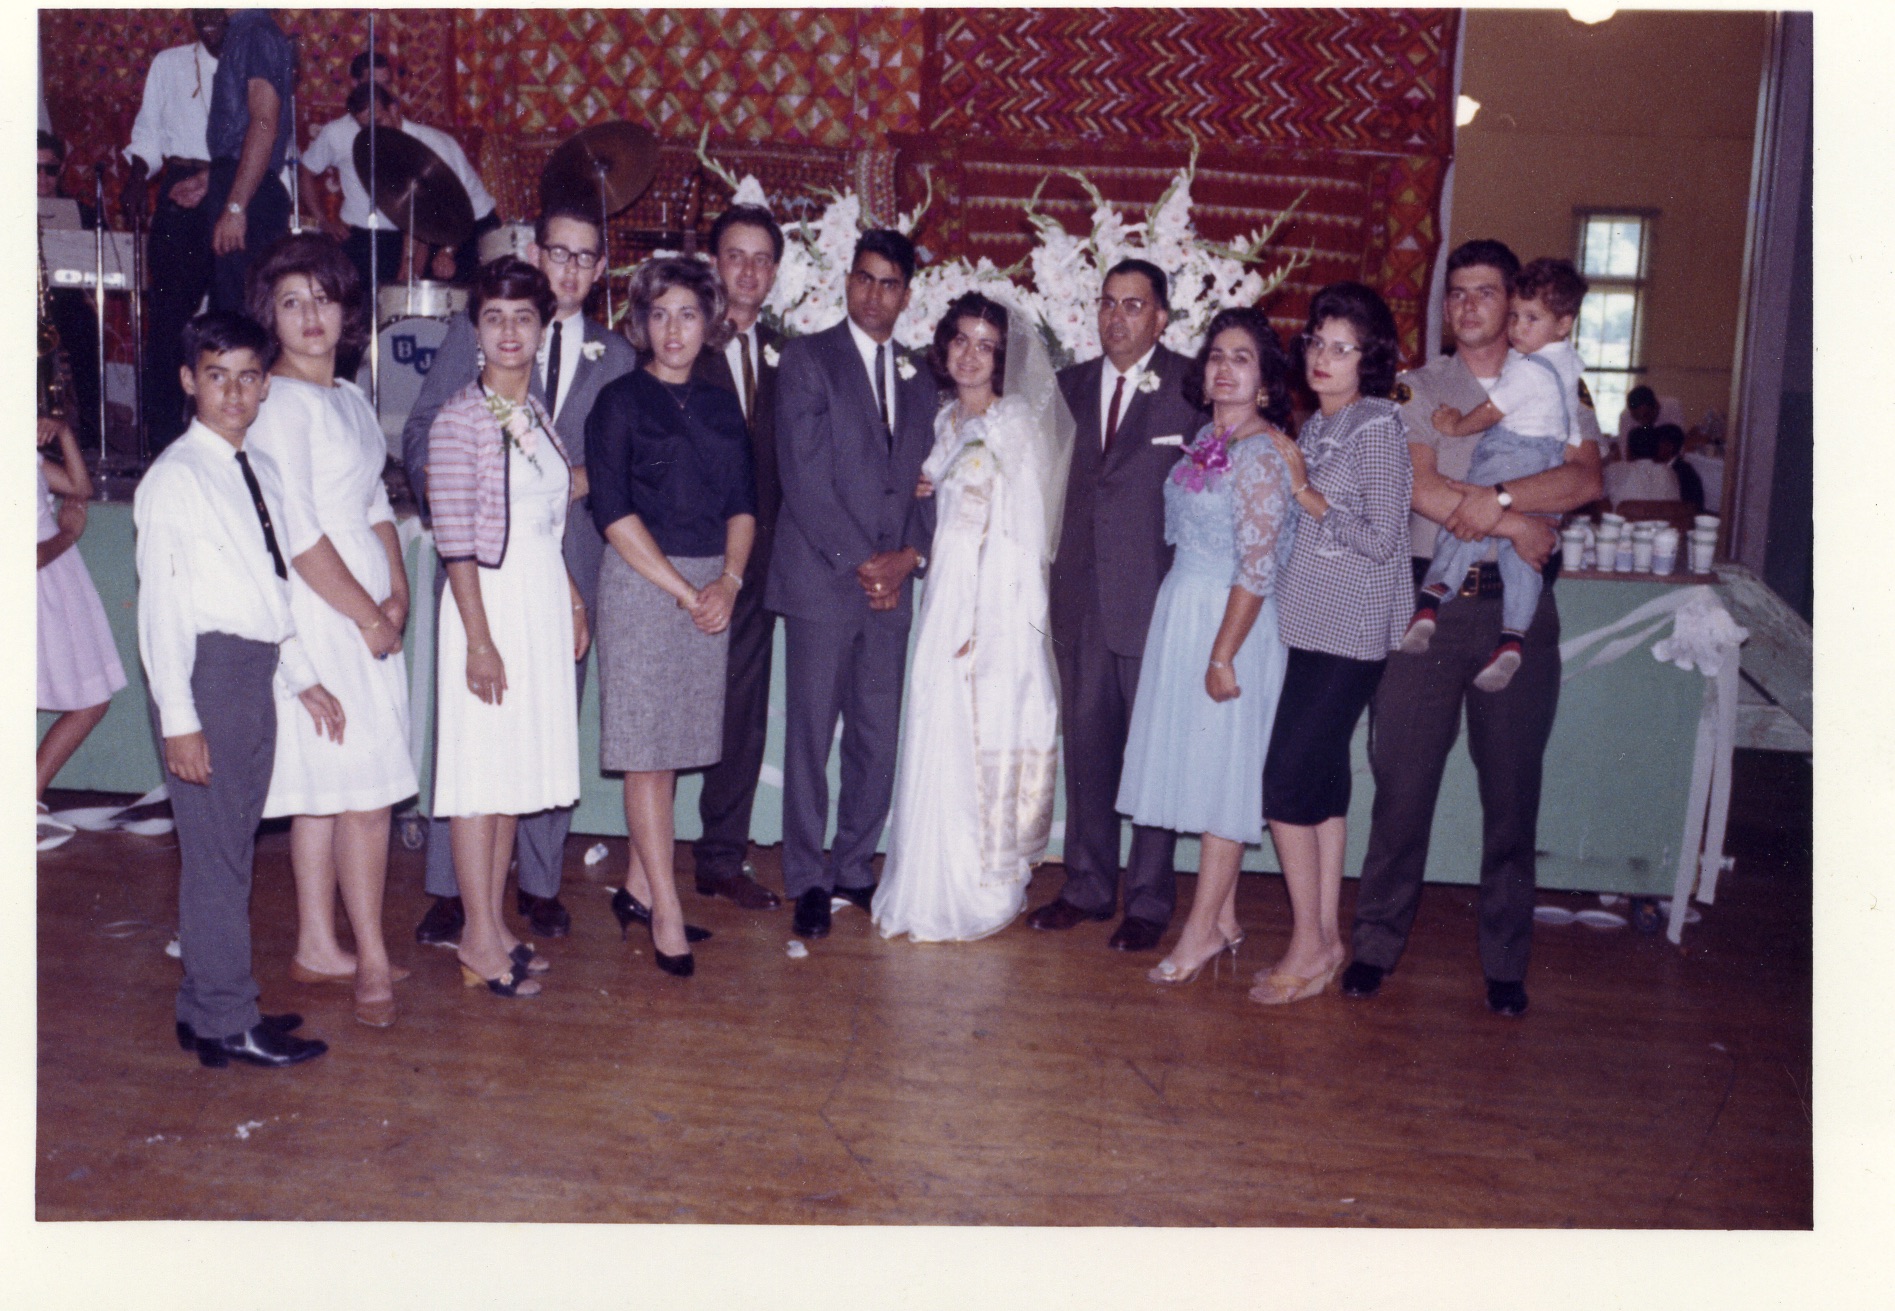 Wedding Party. Courtesy of the Bains Family and the Punjabi American Heritage Society.